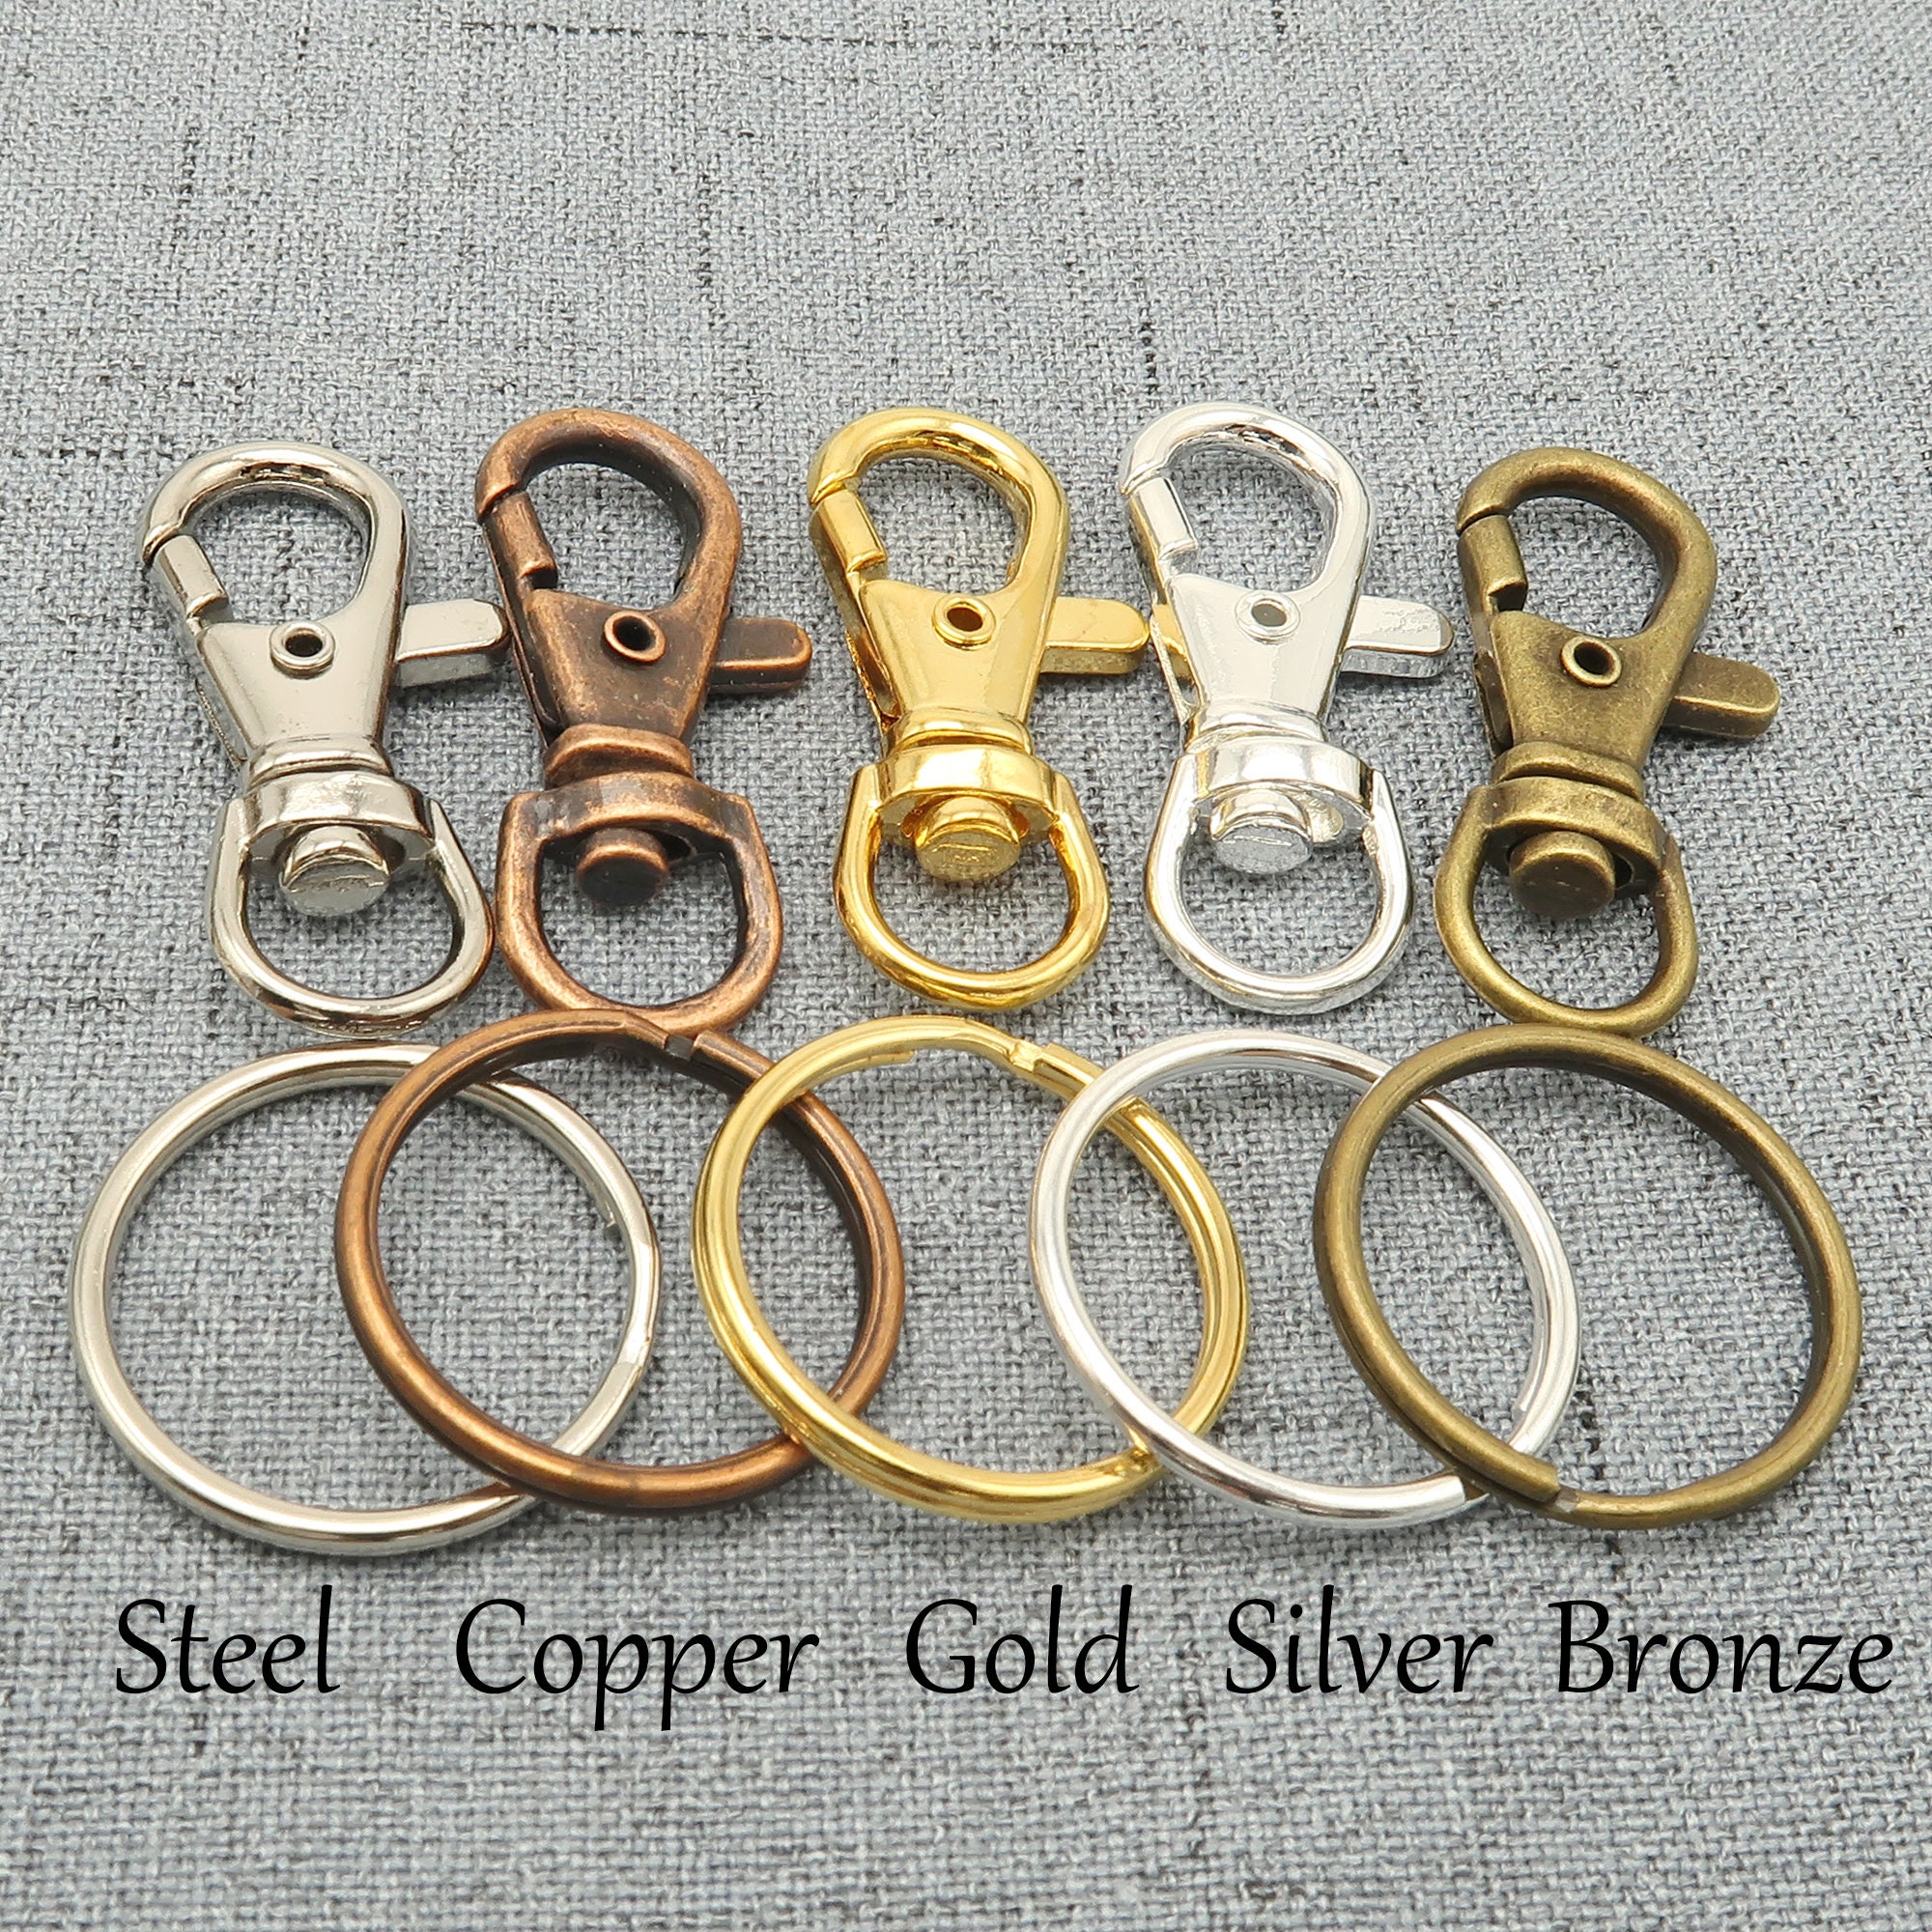 10/50 Keychain Supplies, Key Chain Keyring Wholesale, Big Lobster Clasp Chain  Key Ring Jump Rings Bronze/gold/copper/silver/gold 14K 